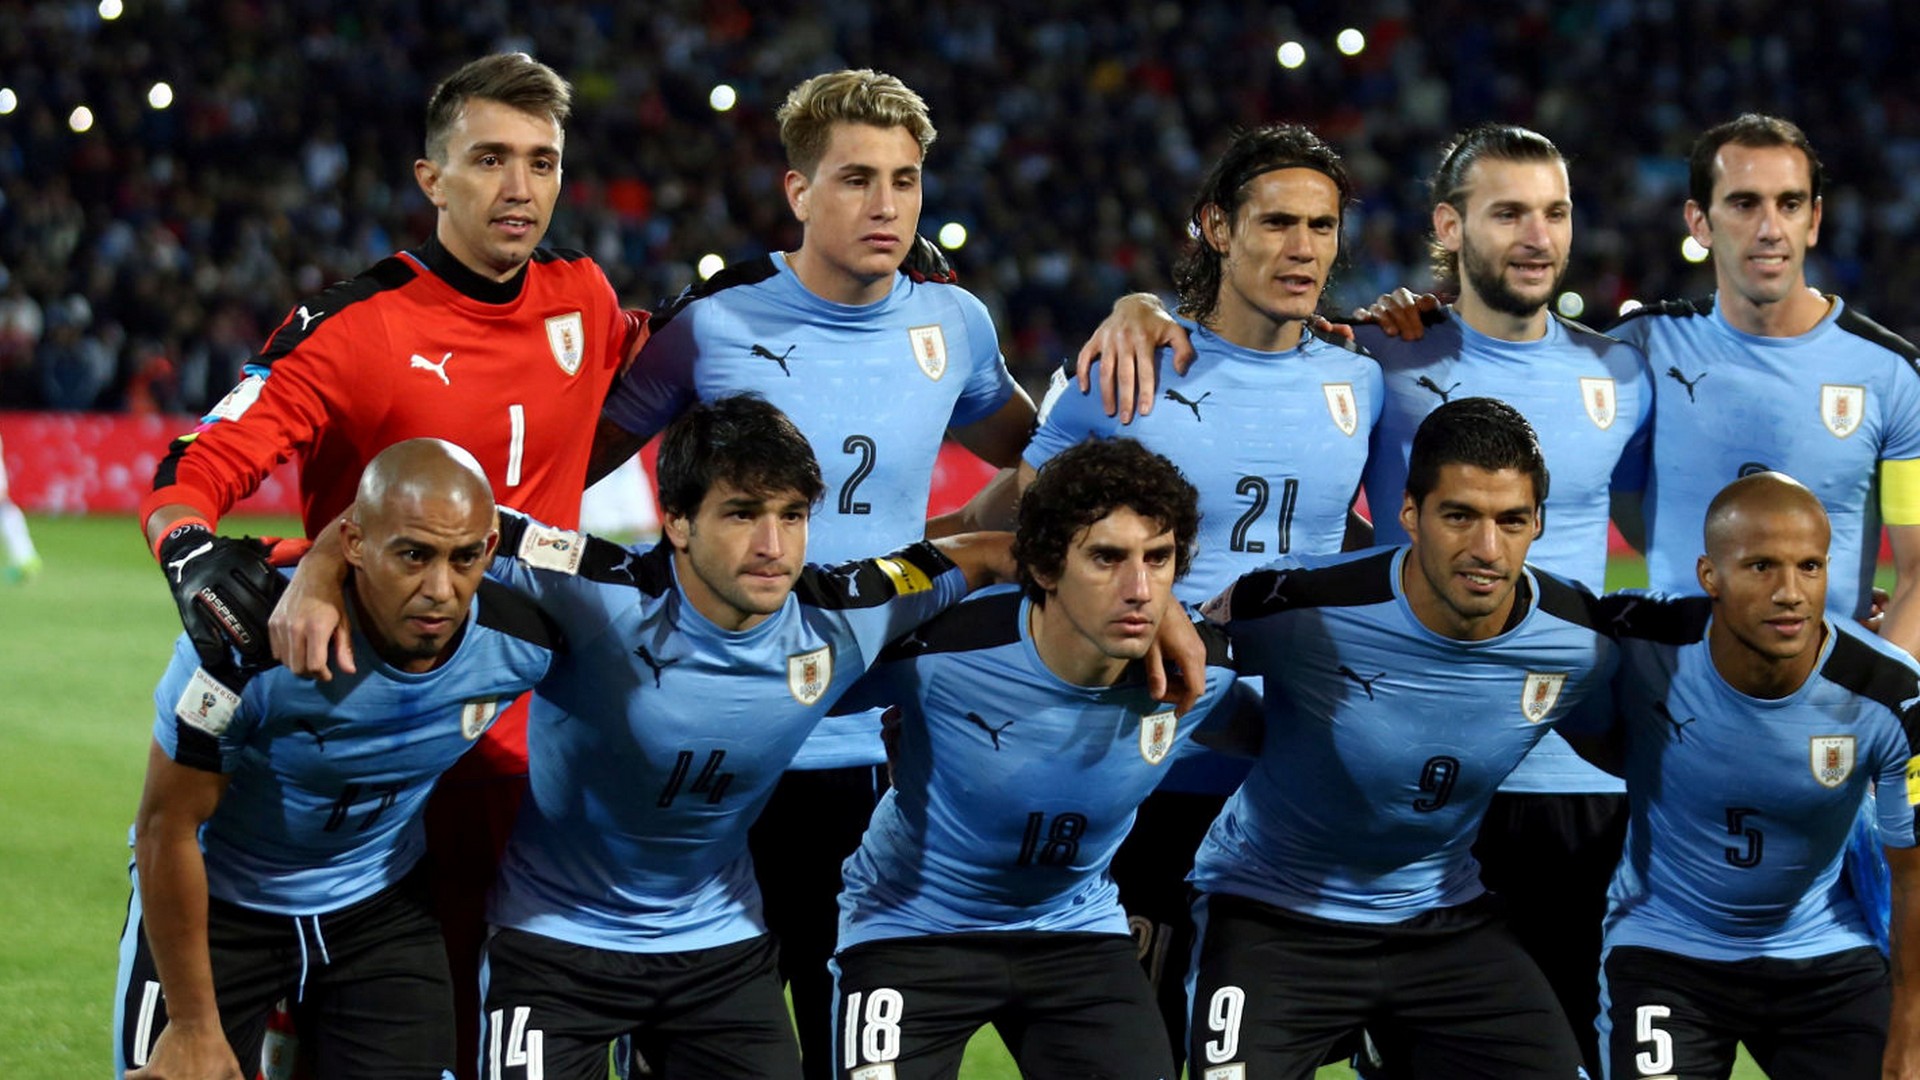 HD Wallpaper Uruguay National Team With Resolution 1920X1080 pixel. You can make this wallpaper for your Desktop Computer Backgrounds, Mac Wallpapers, Android Lock screen or iPhone Screensavers